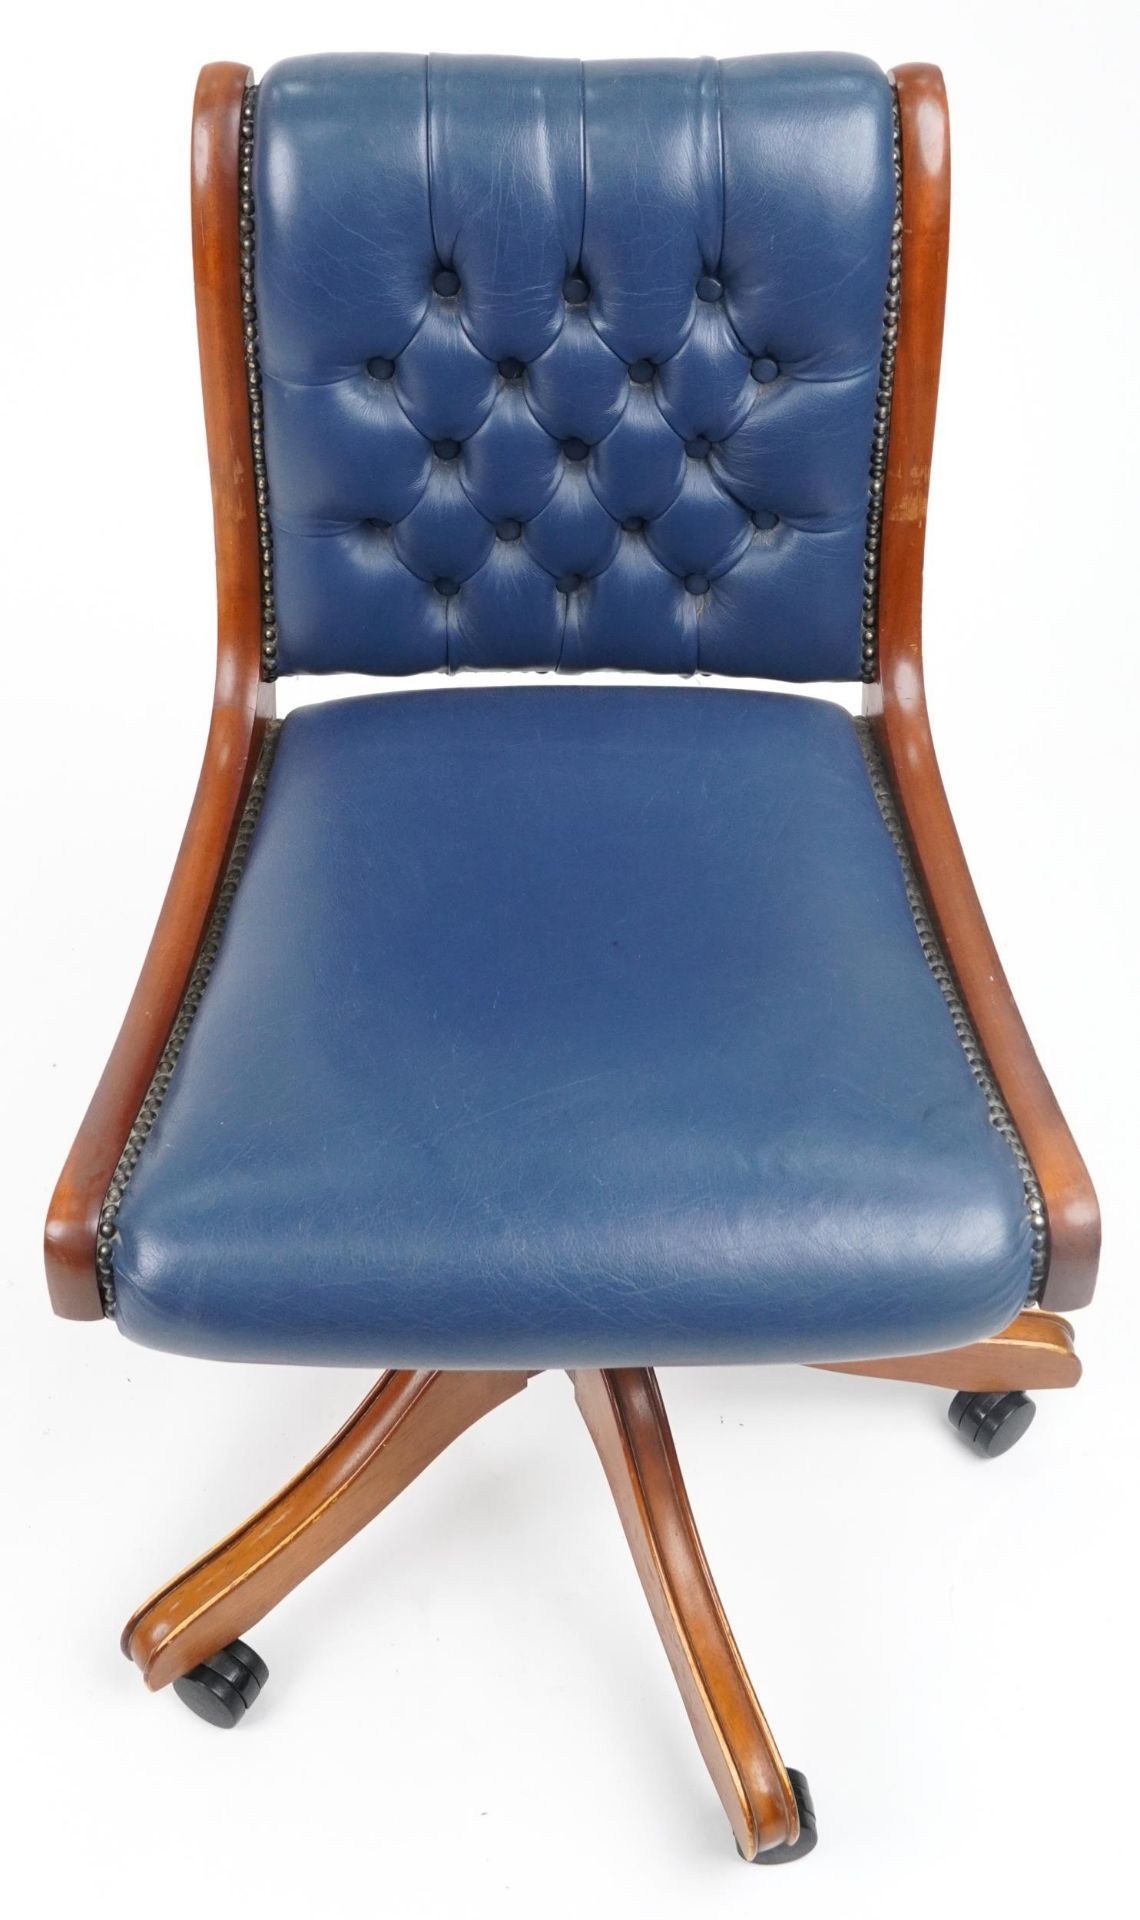 Mahogany and blue leather button back upholstered adjustable desk chair, 89cm high - Image 3 of 4